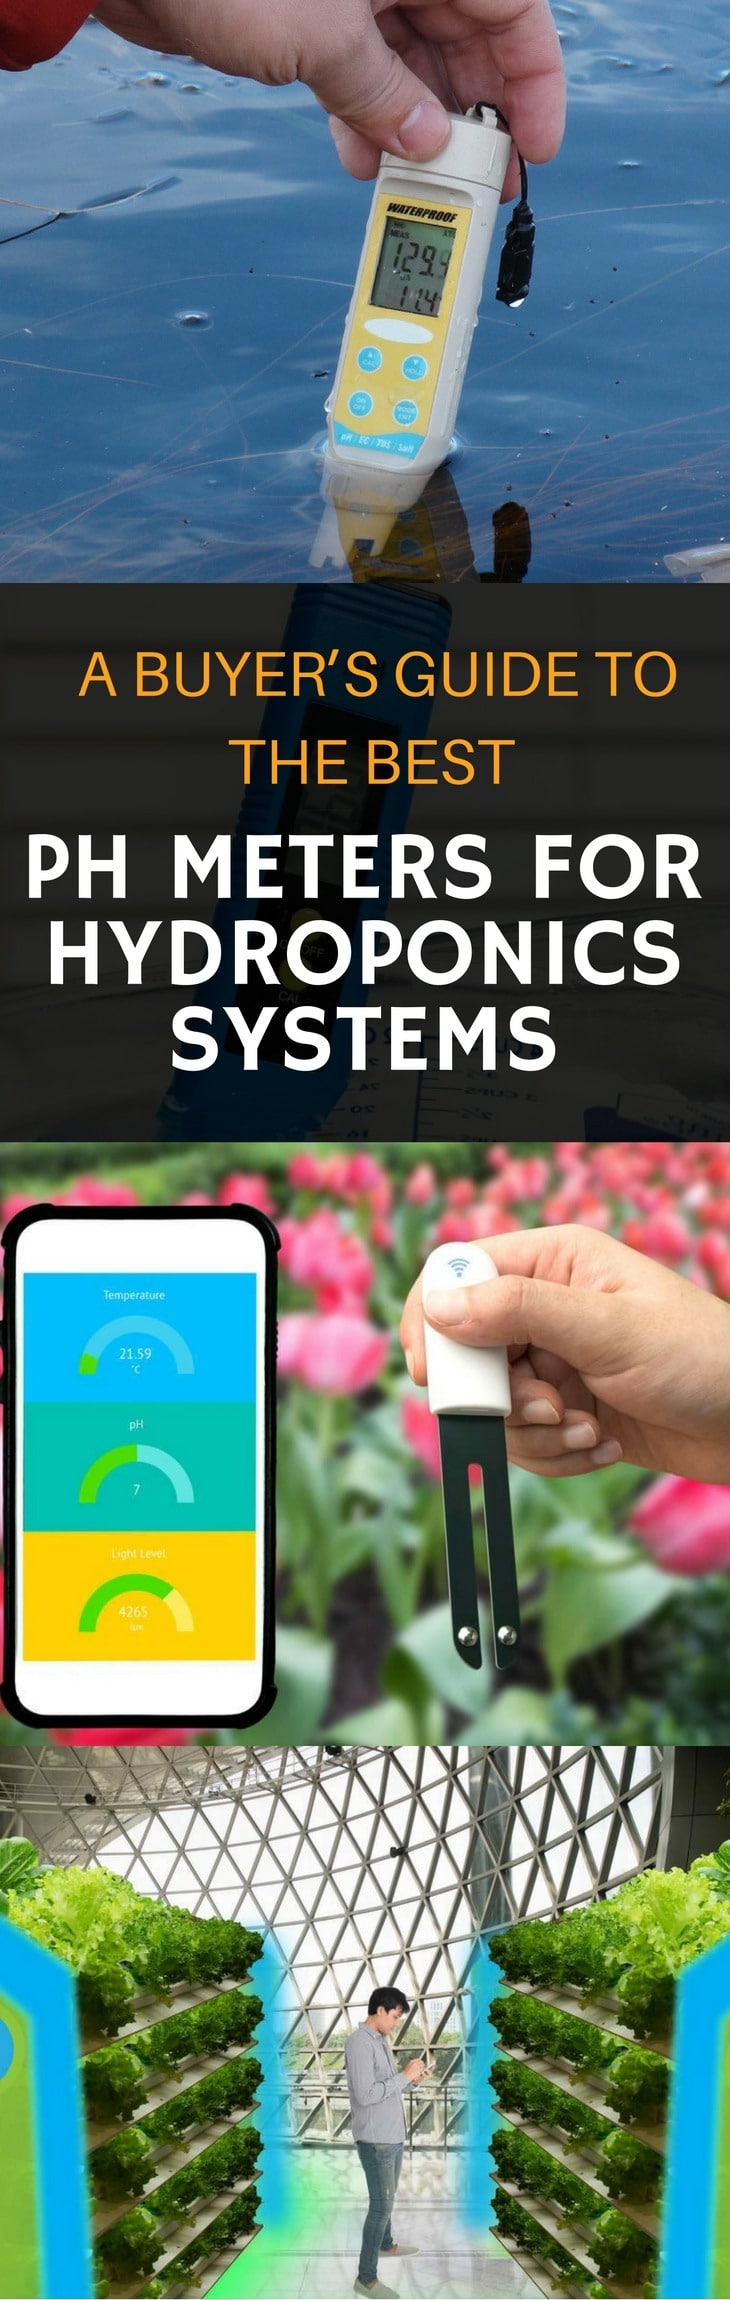 best pH meters for hydroponics pin it